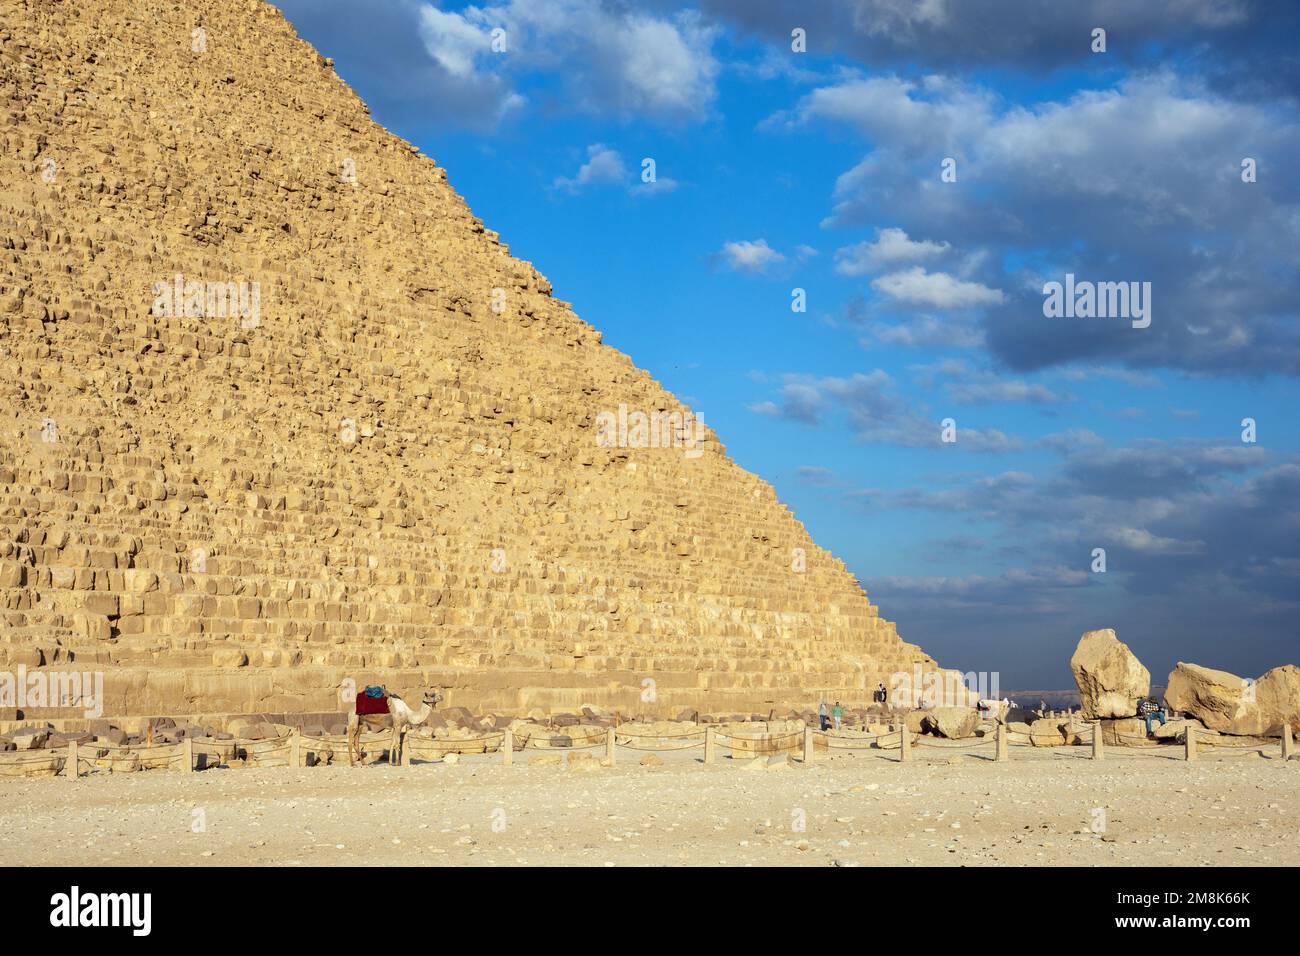 Camel near pyramid of Khafre or of Chephren the second tallest and second largest of the 3 Ancient Egyptian Pyramids of Giza Stock Photo